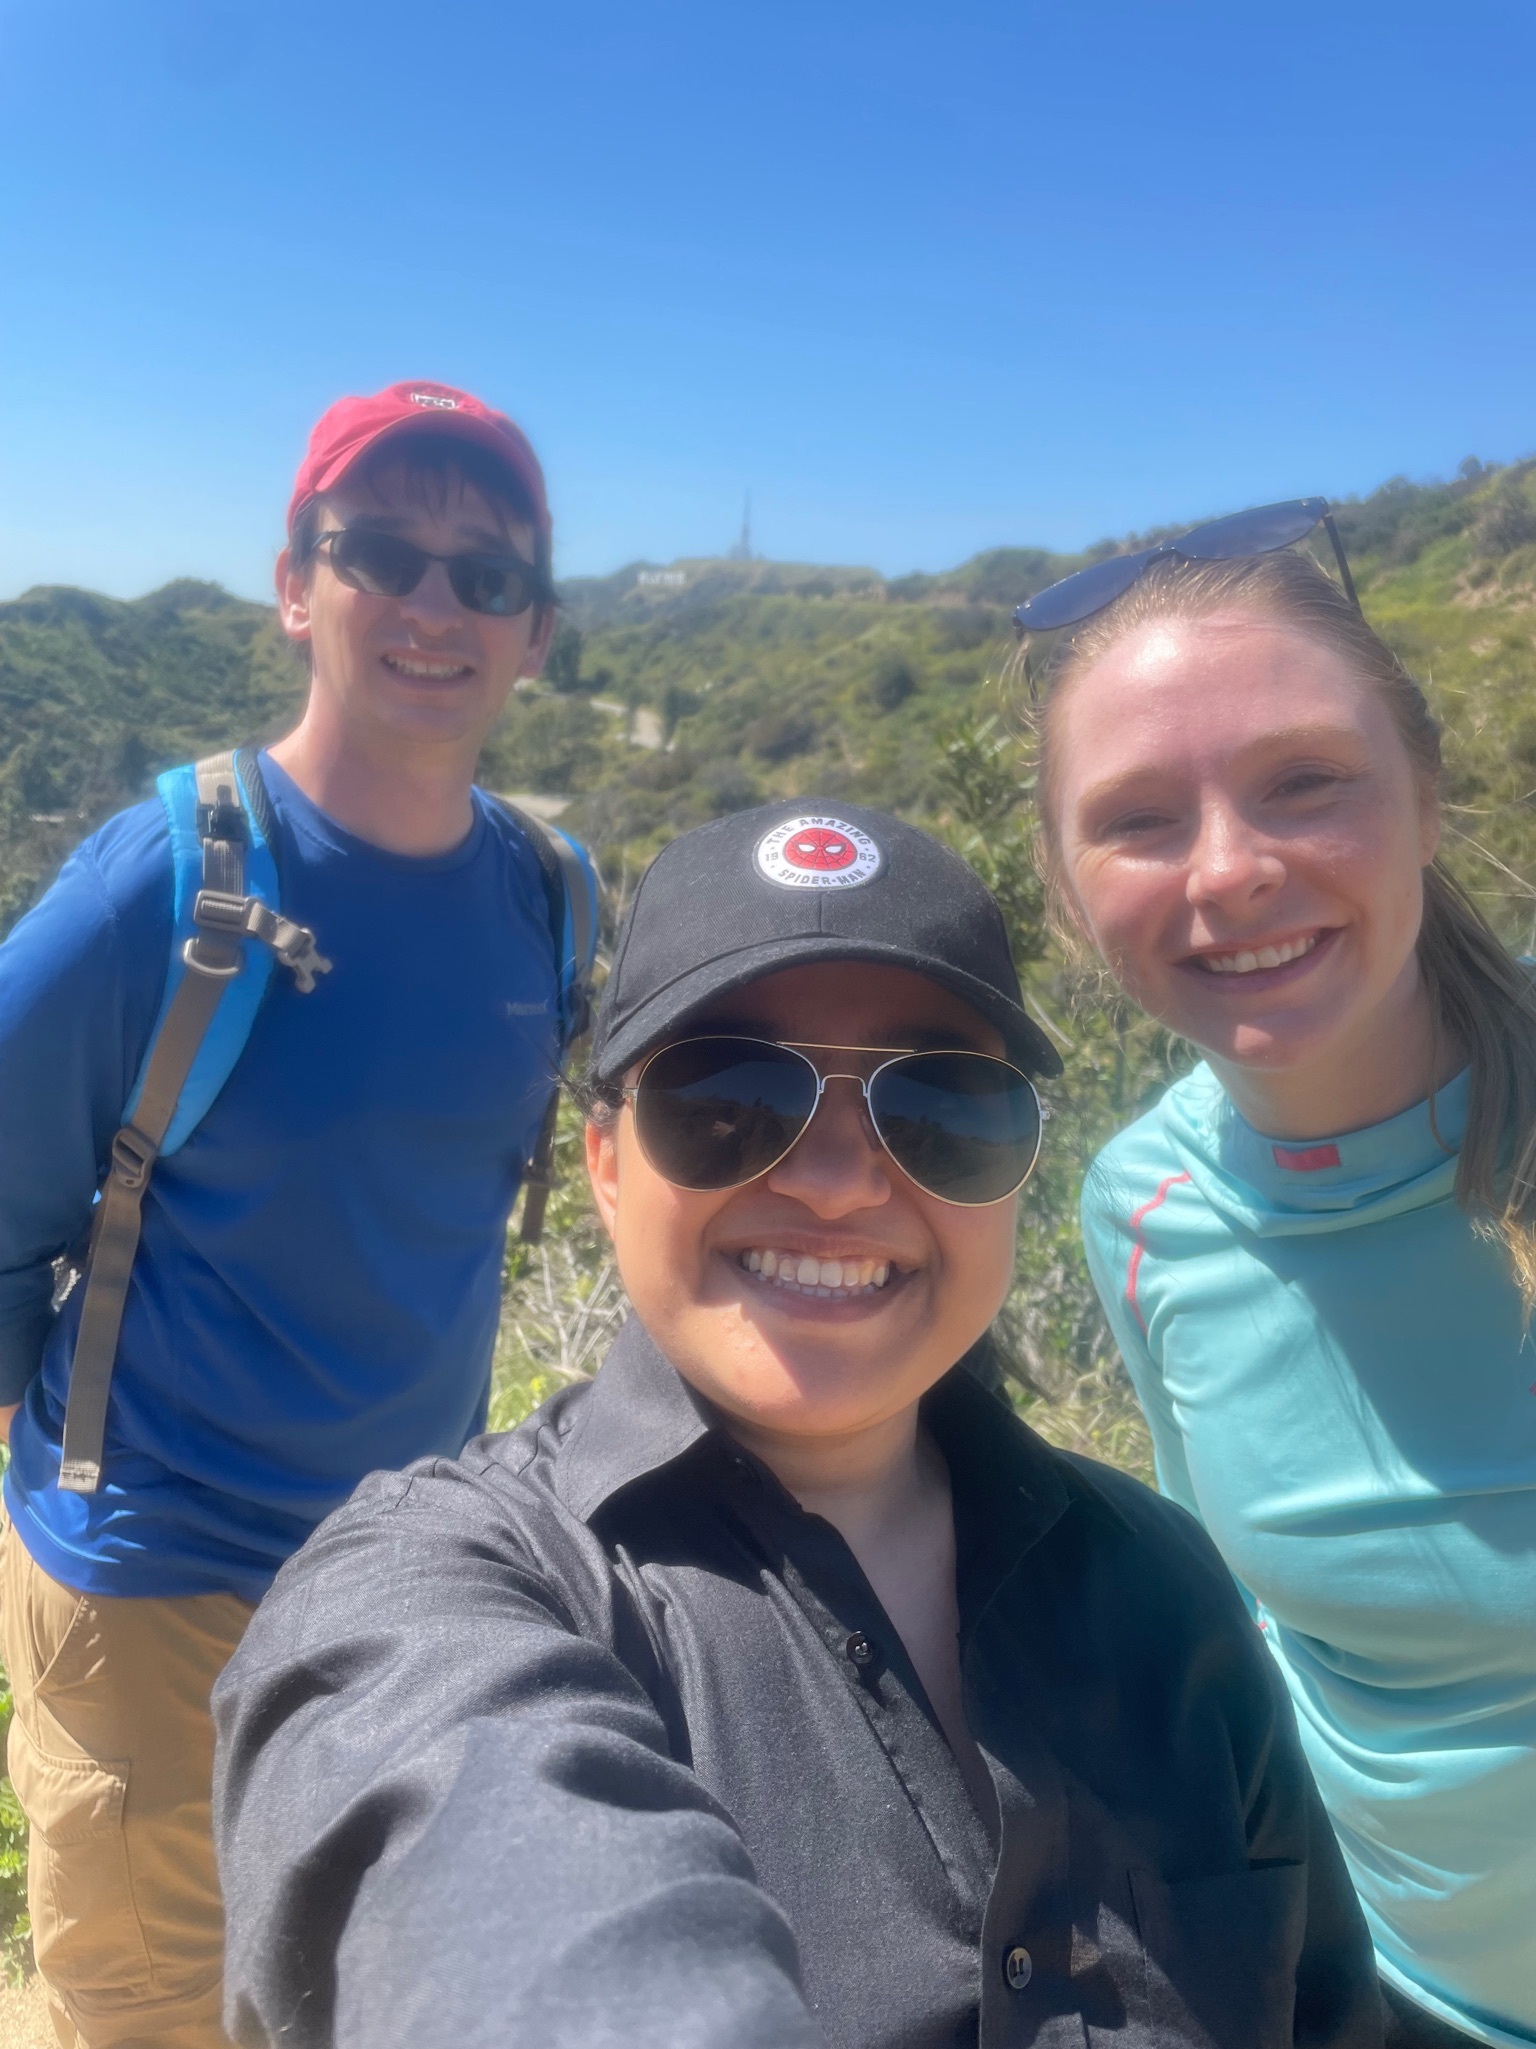 Student Posing With Two Others On A Hike